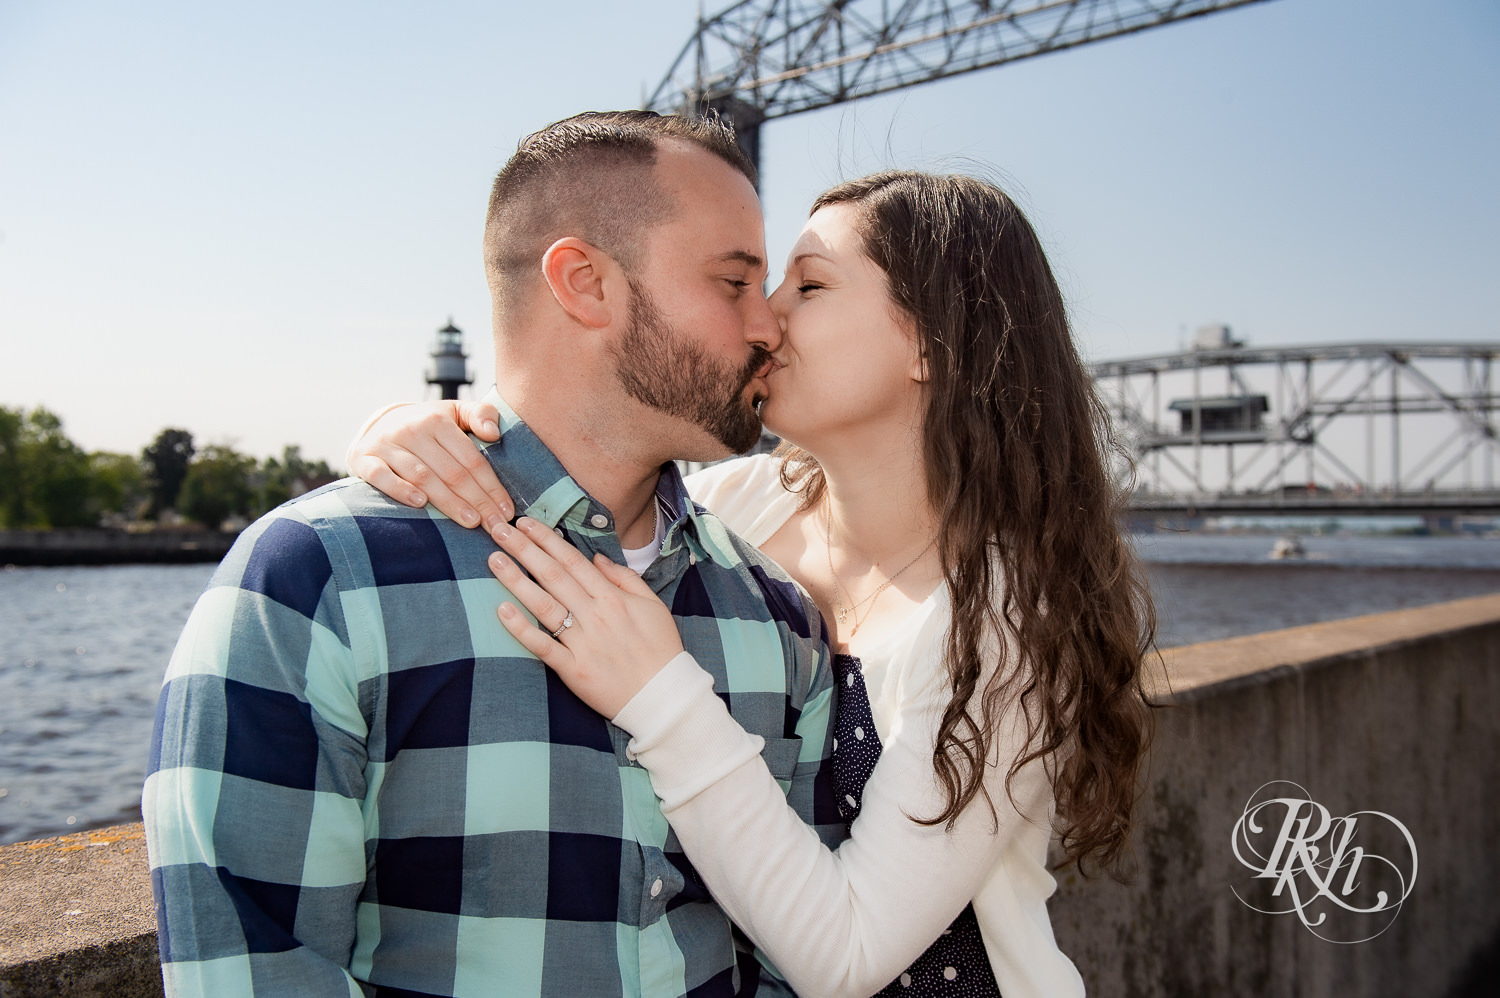 Man and woman kiss with Lake Superior in the background in Duluth, Minnesota.